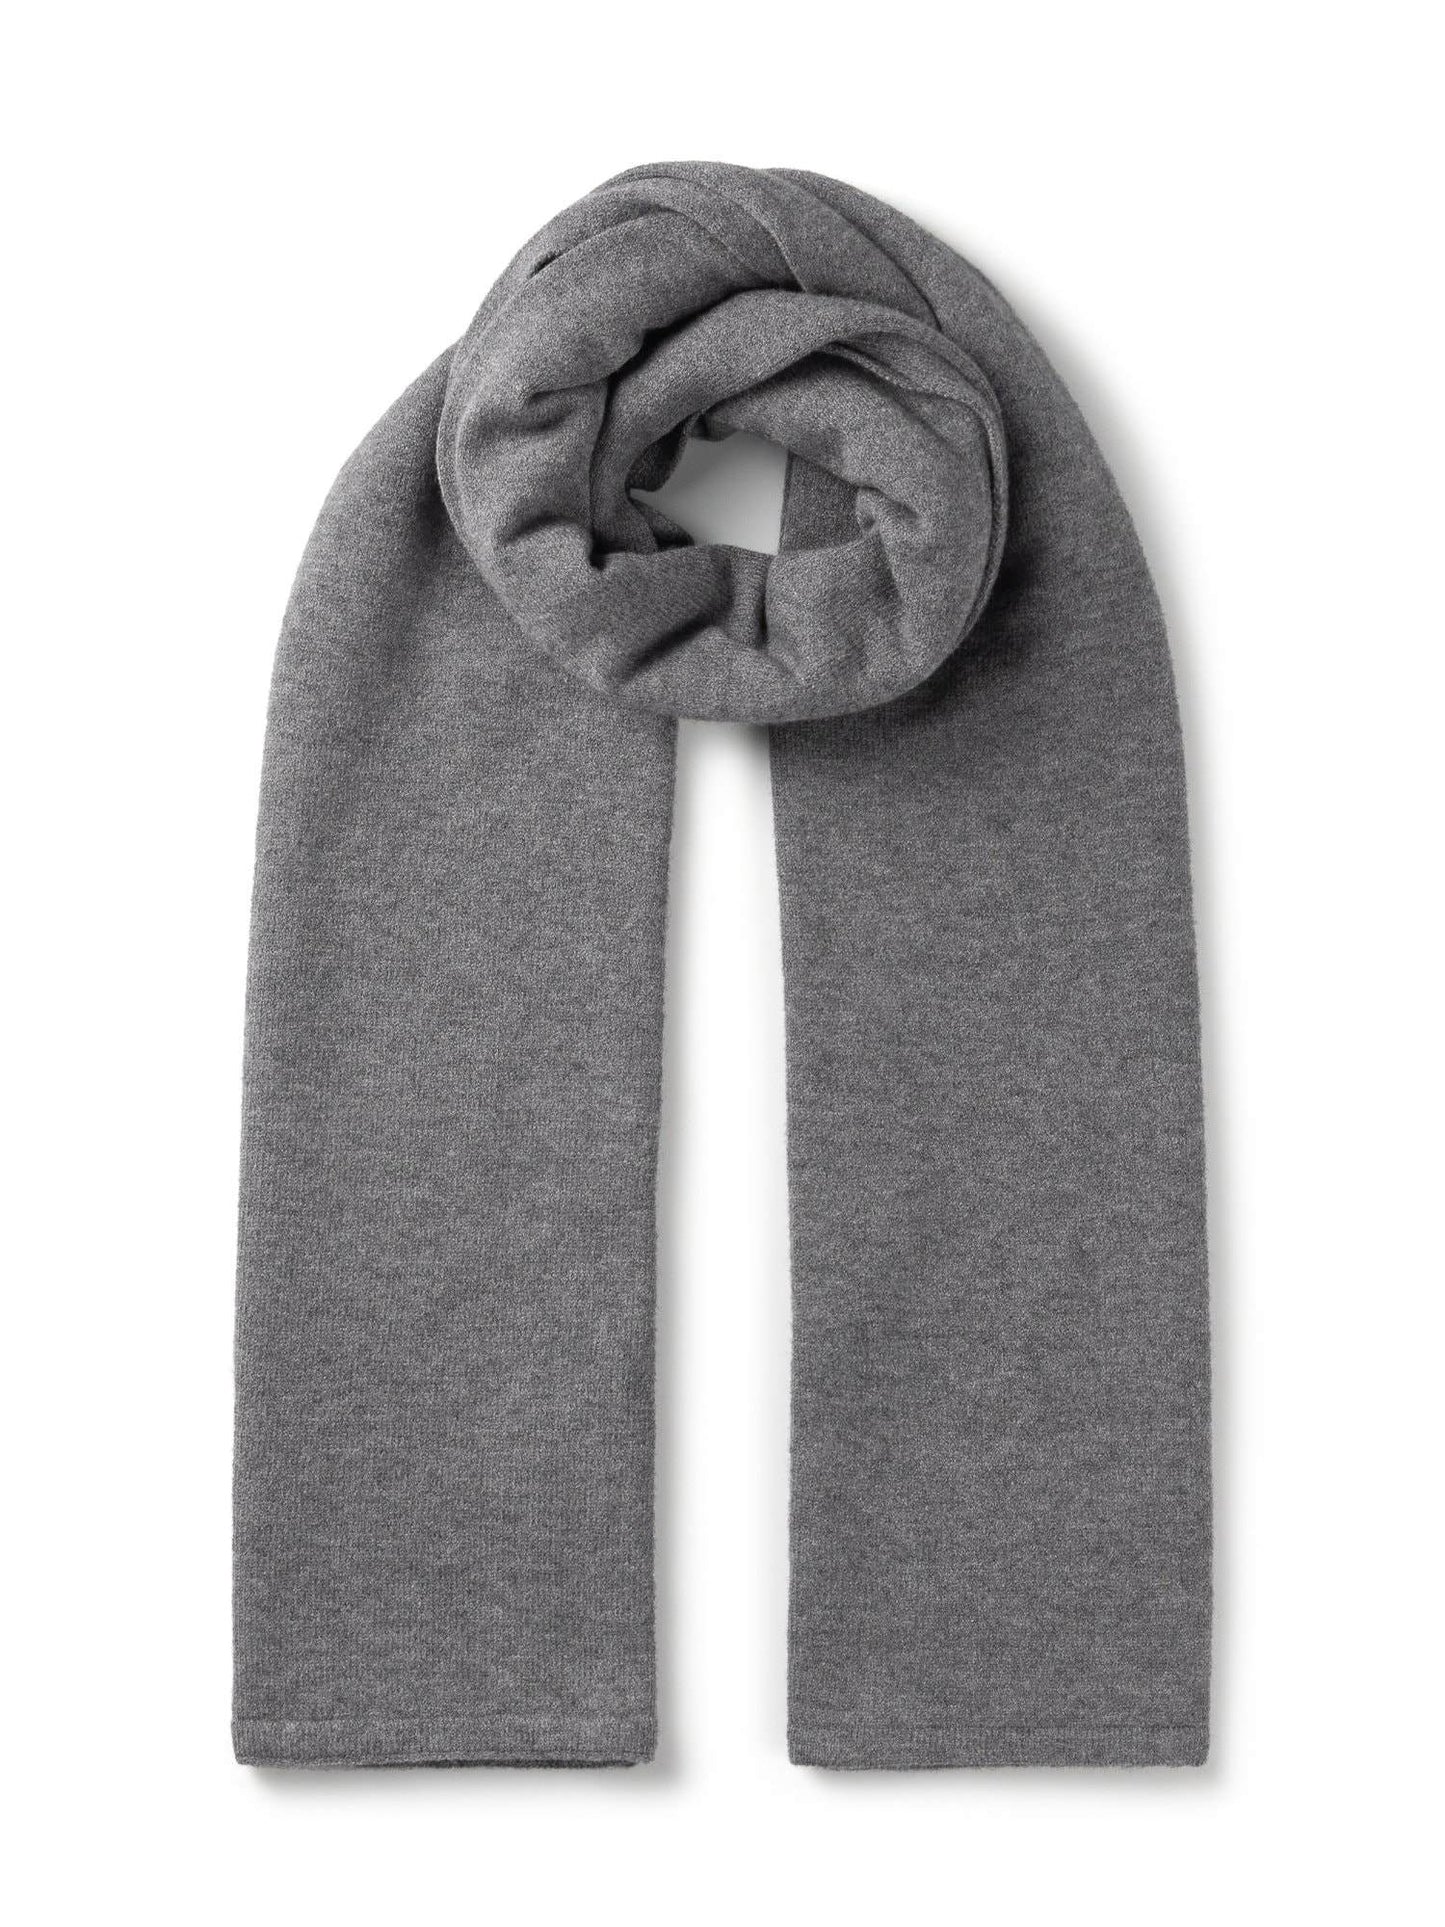 Chalk Suzy Scarf - Charcoal Chalk The White Room